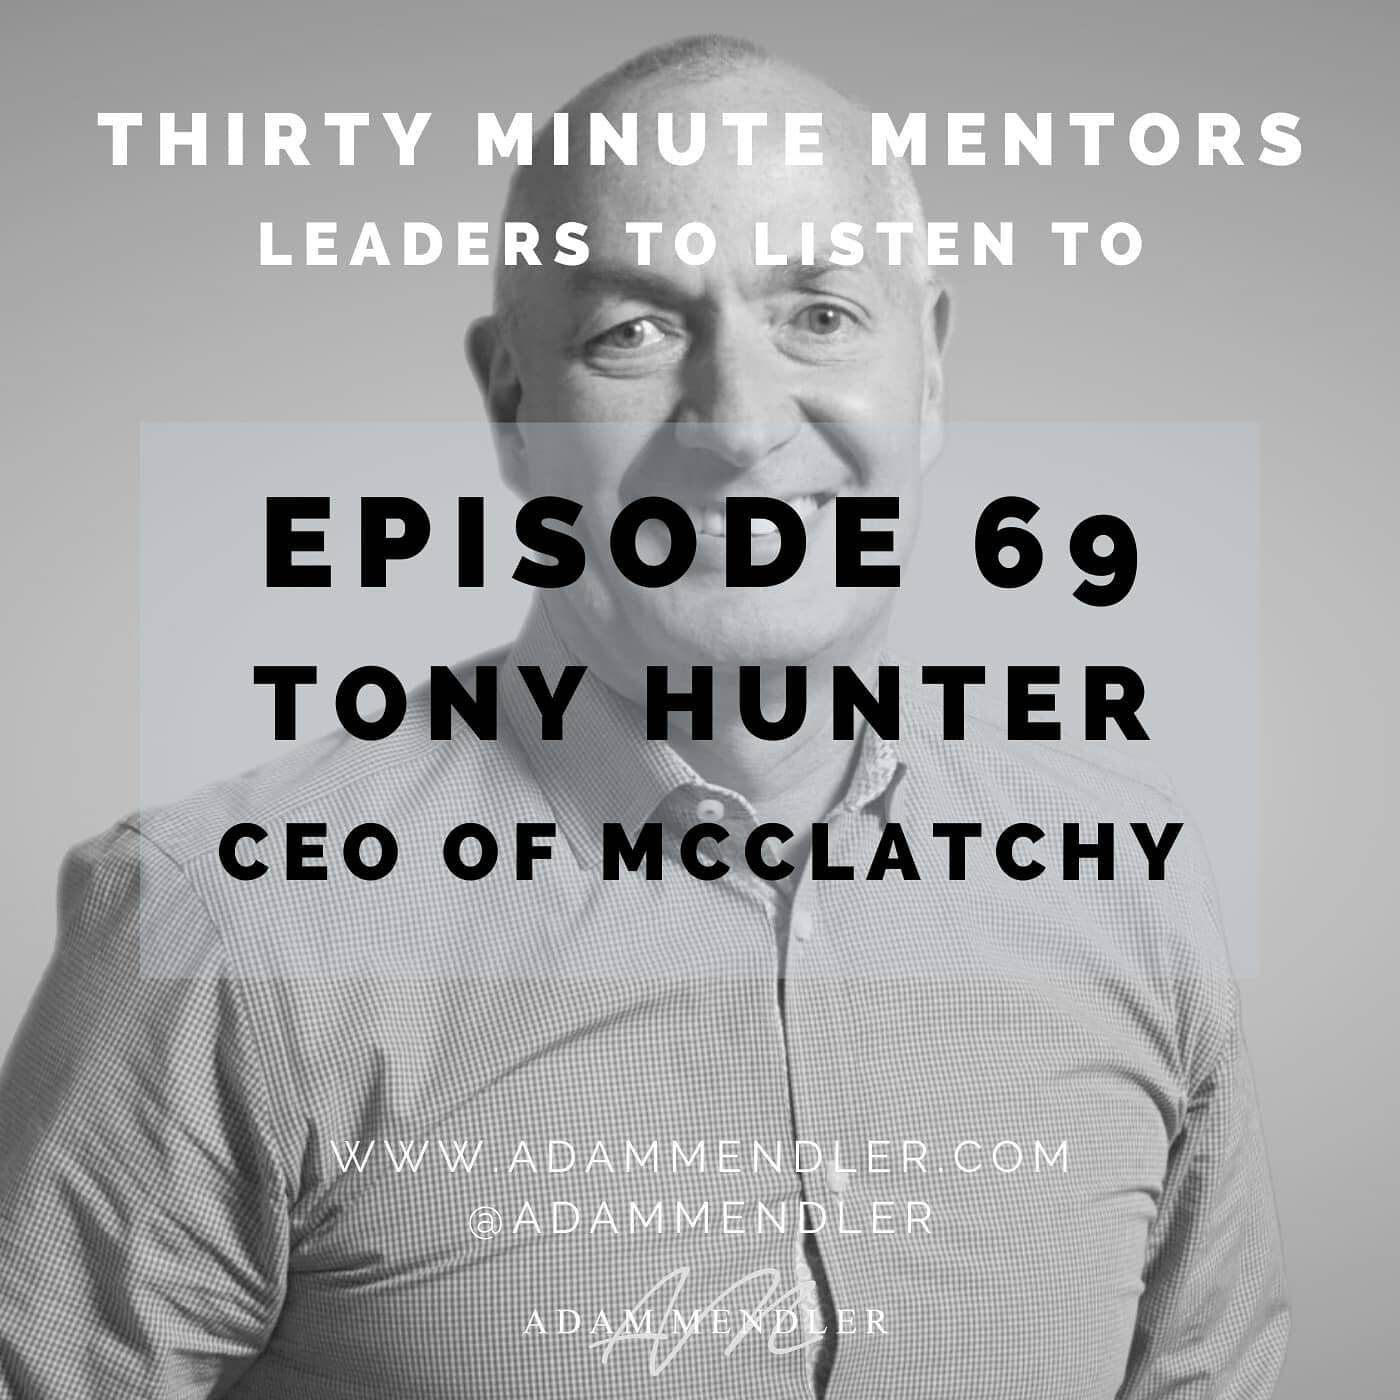 Tony Hunter is the CEO of McClatchy, one of America's oldest and most prominent publishing companies, with newspapers across 30 U.S. markets catering to 65 million monthly readers. Tony previously served as publisher of the Chicago Tribune and CEO of